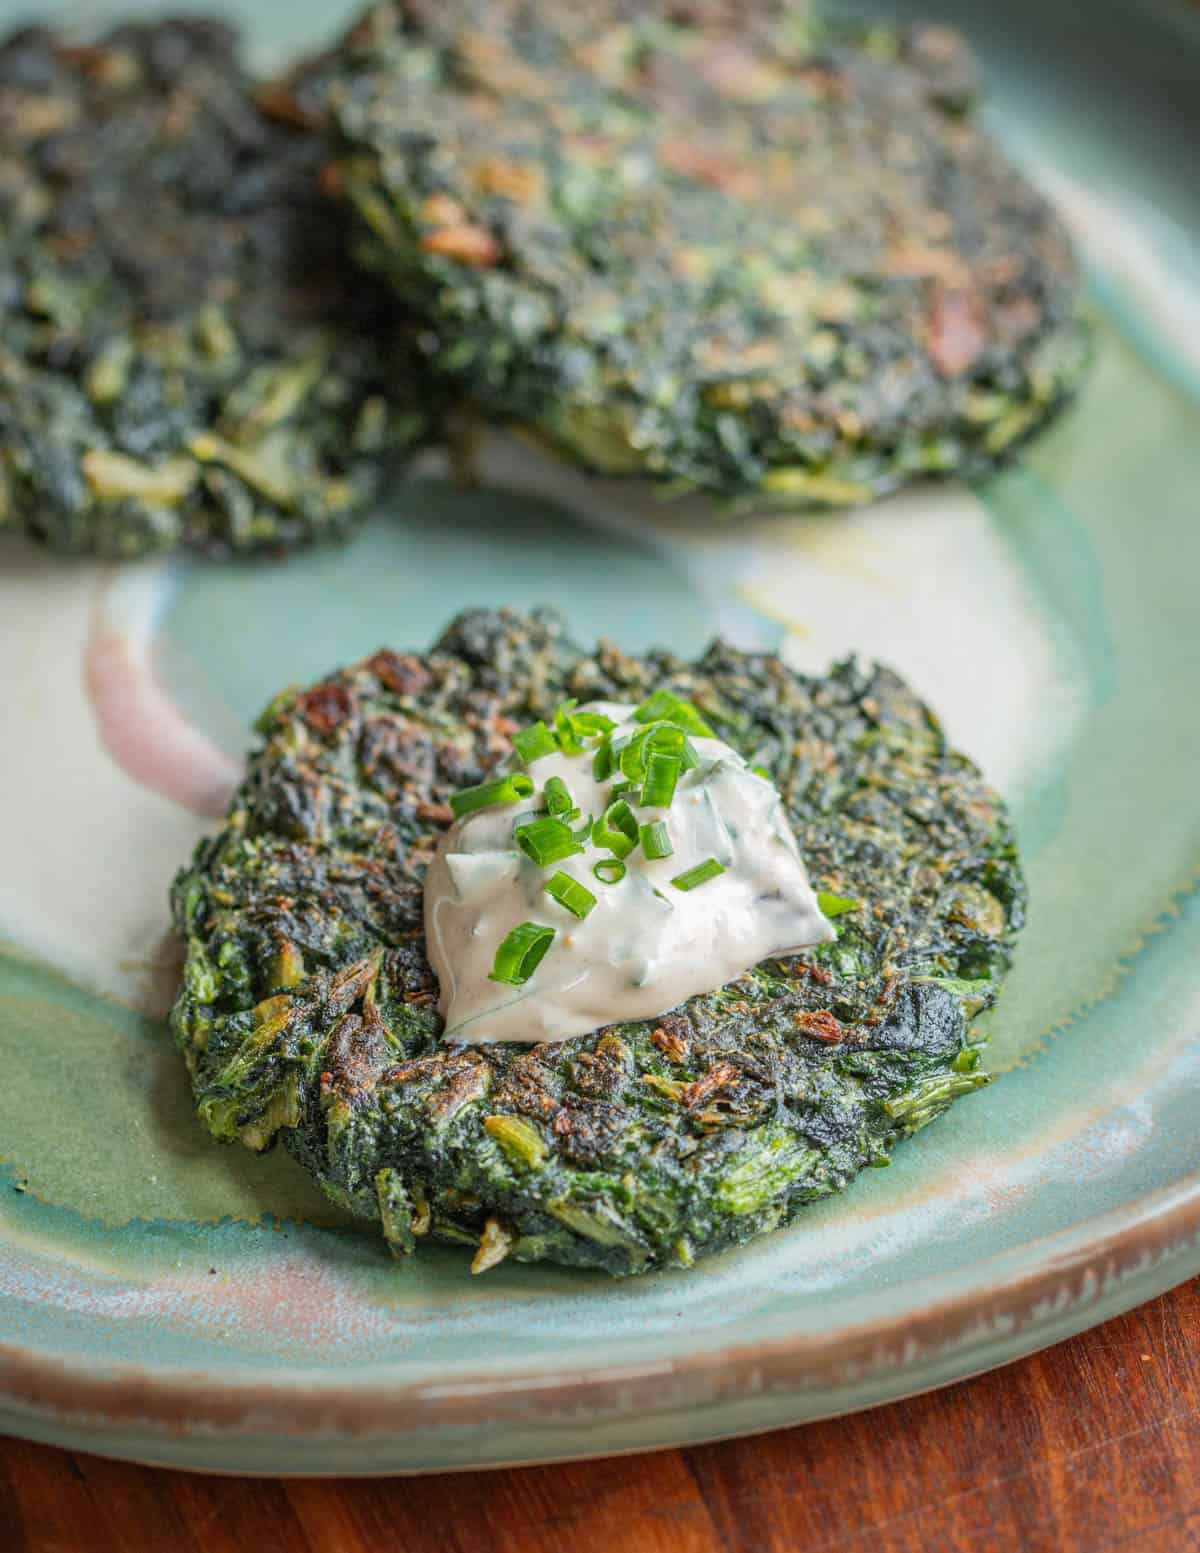 Homemade plant based green burgers or spinach patties on a plate with dip garnished with chives. 